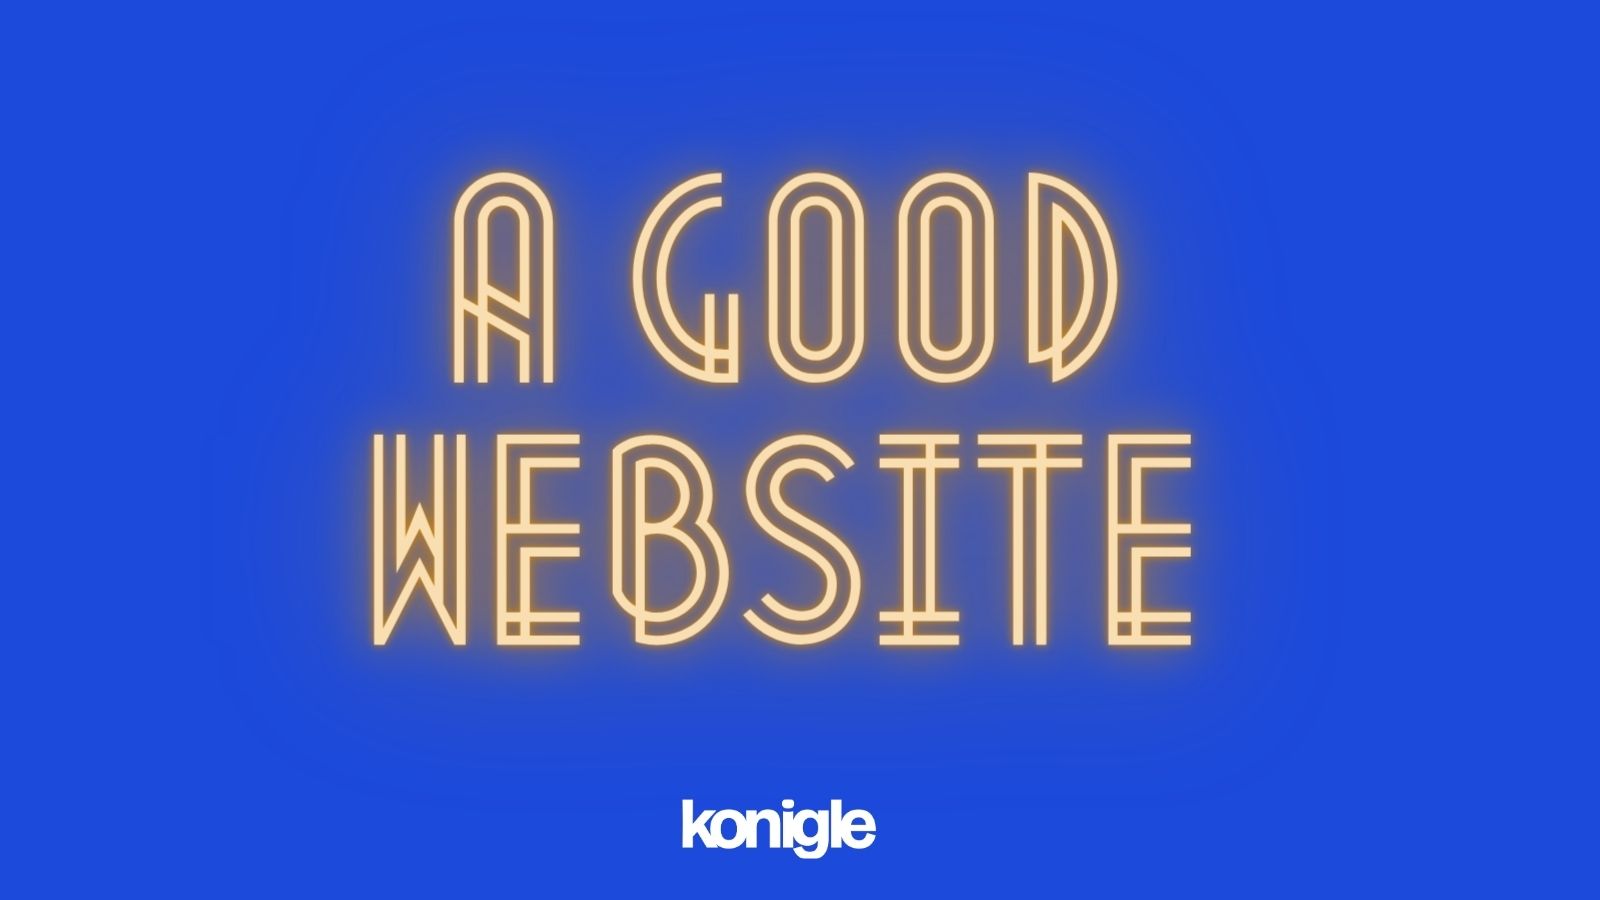 What makes a good website ?